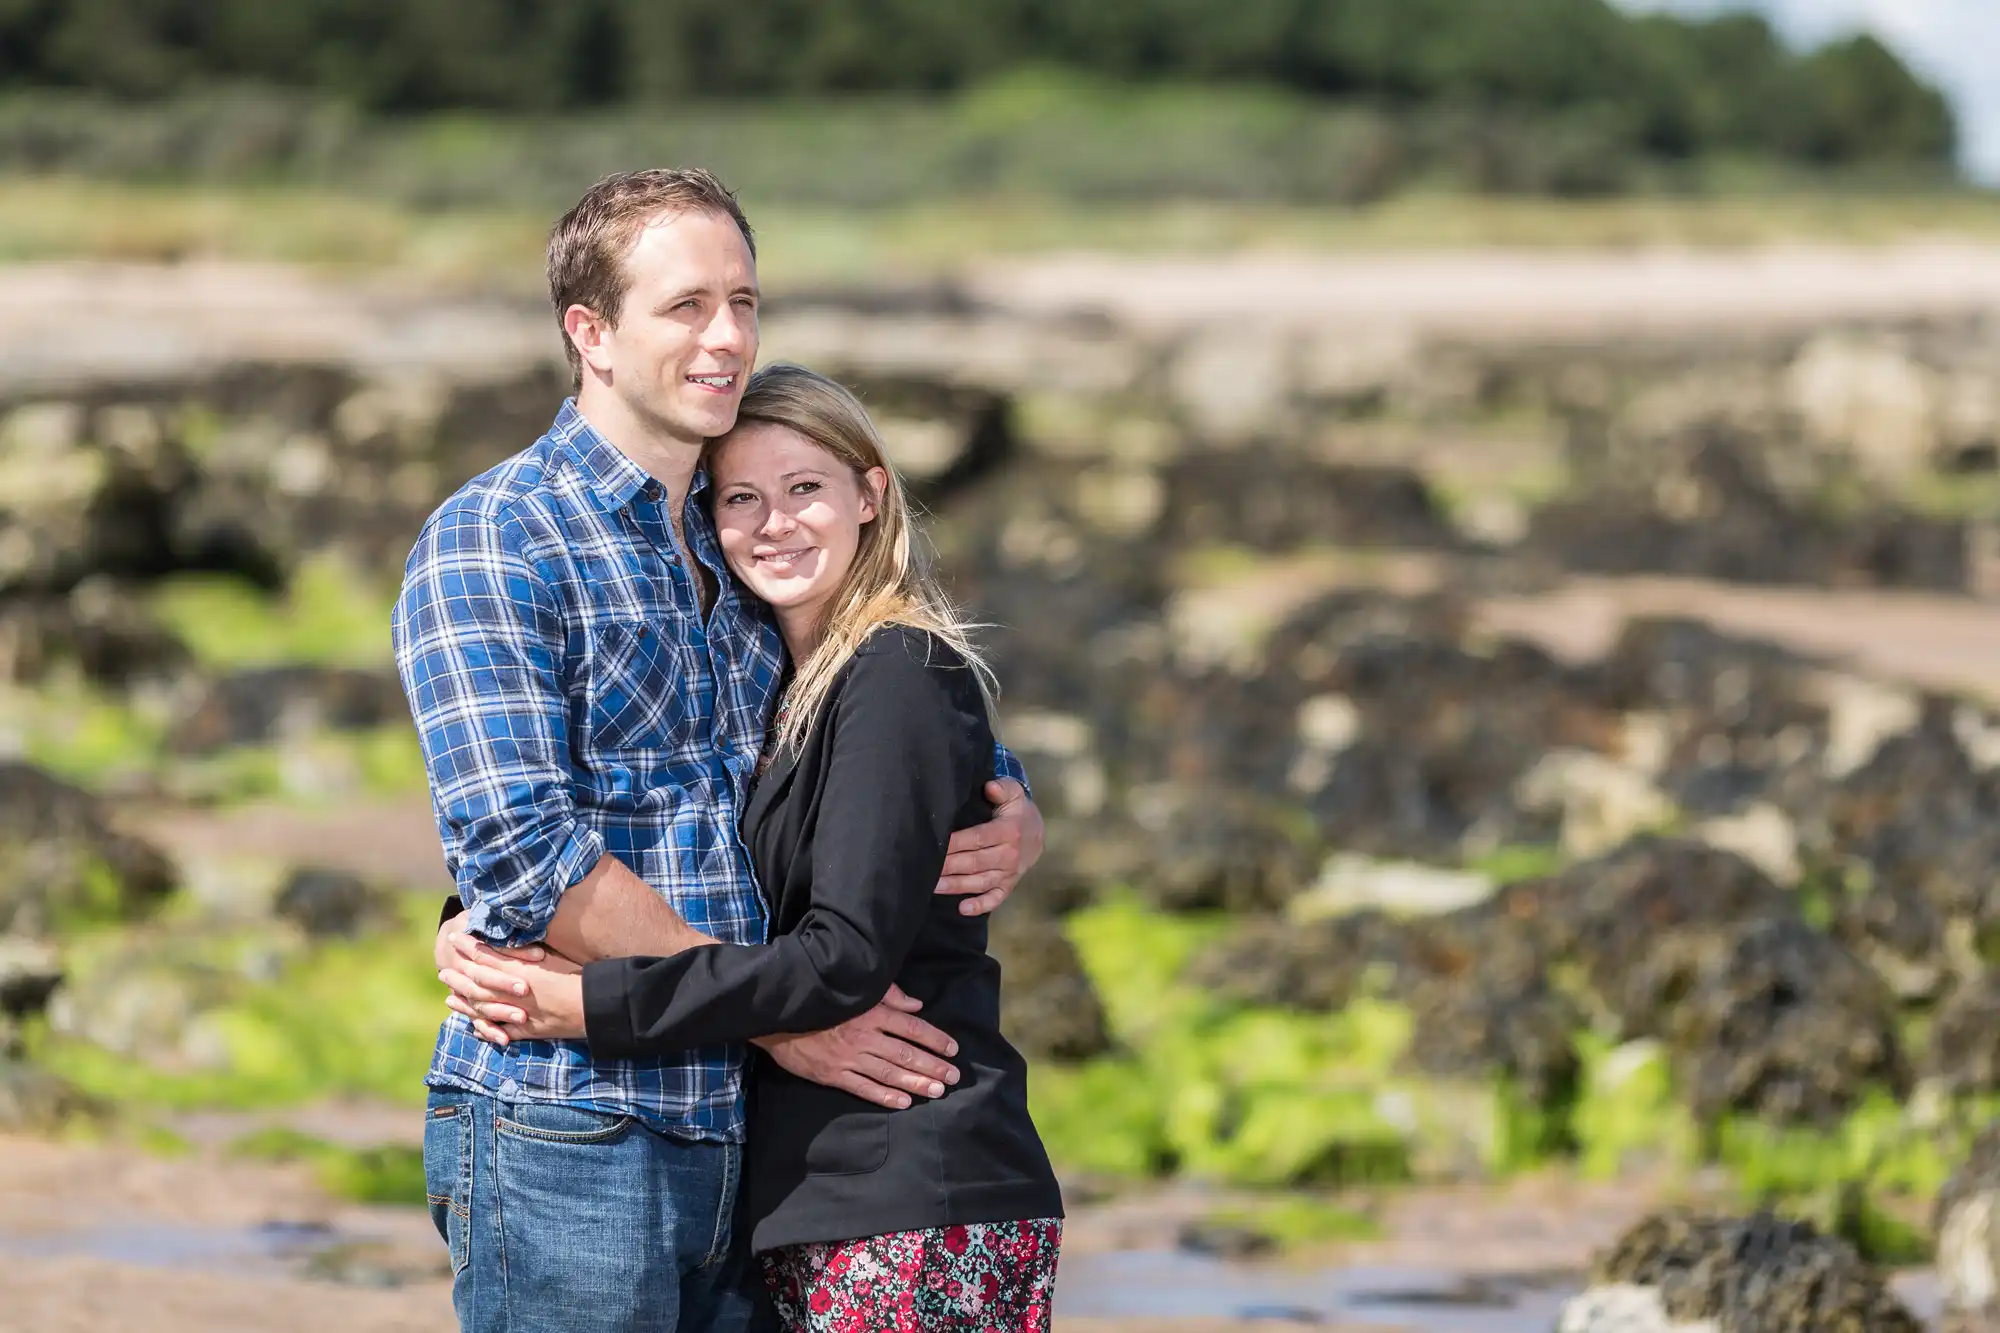 A couple embracing on a rocky beach, smiling towards the camera, with a clear sky and coastal terrain in the background.